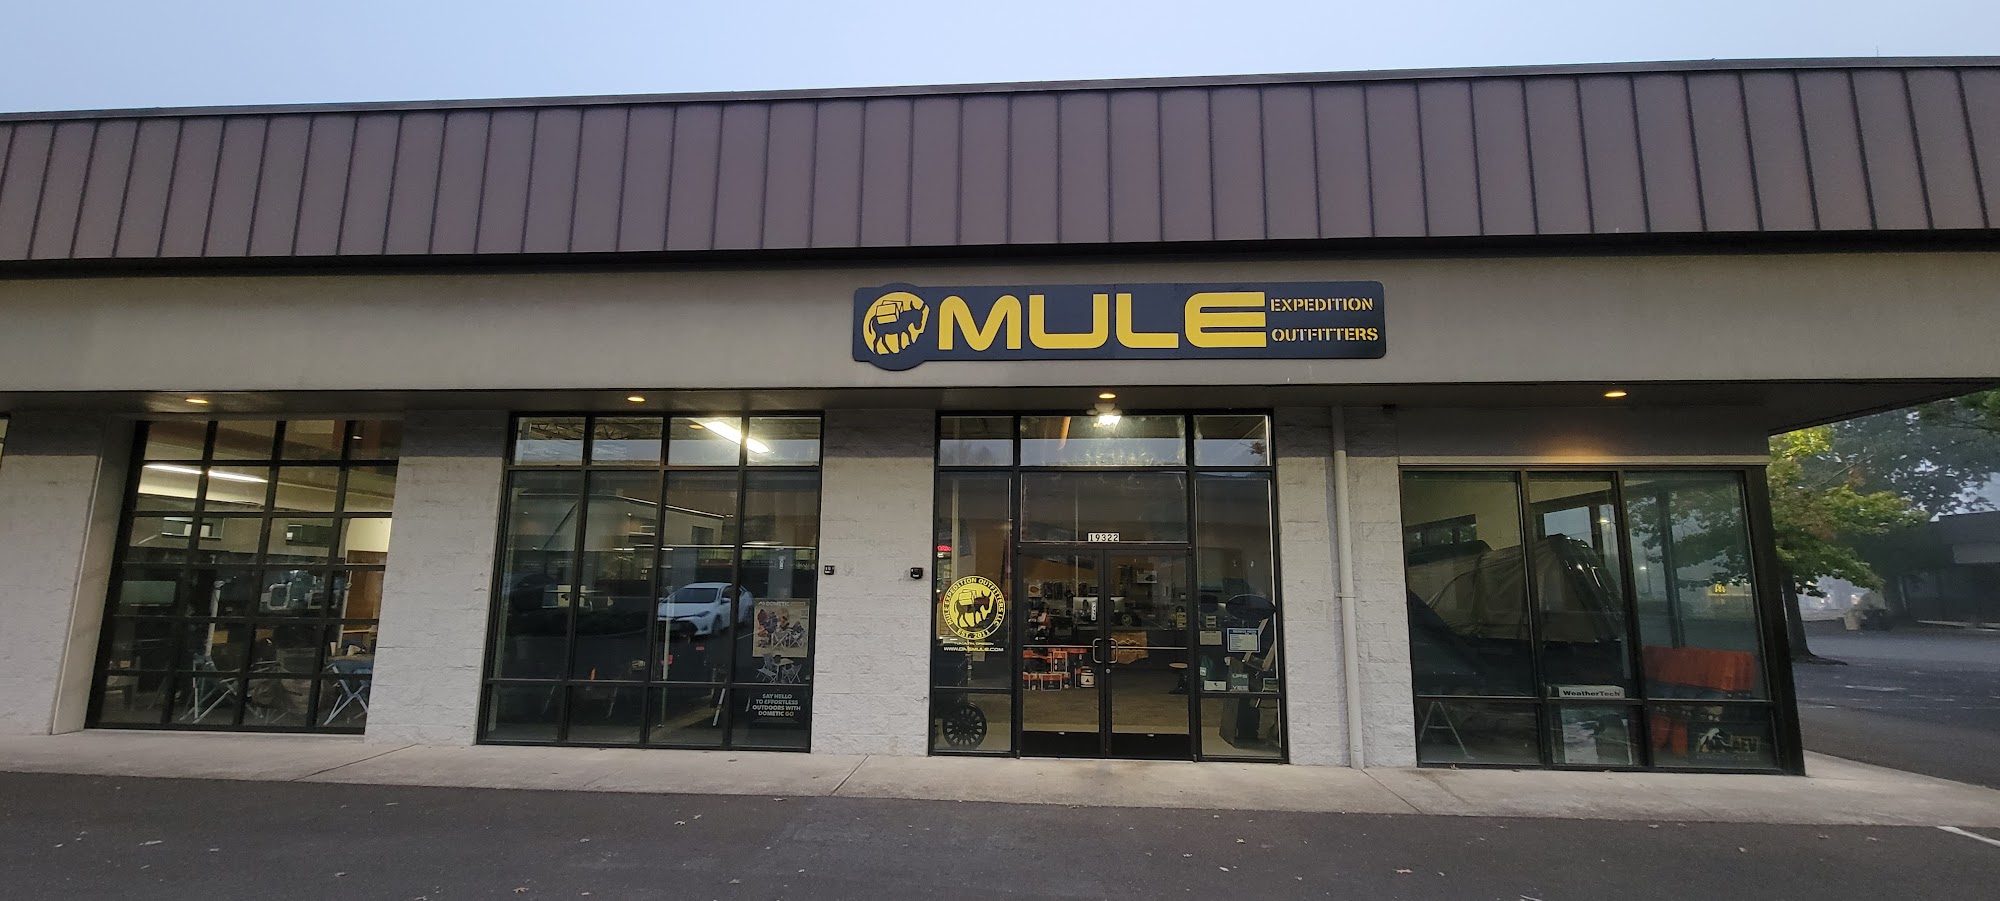 MULE Expedition Outfitters